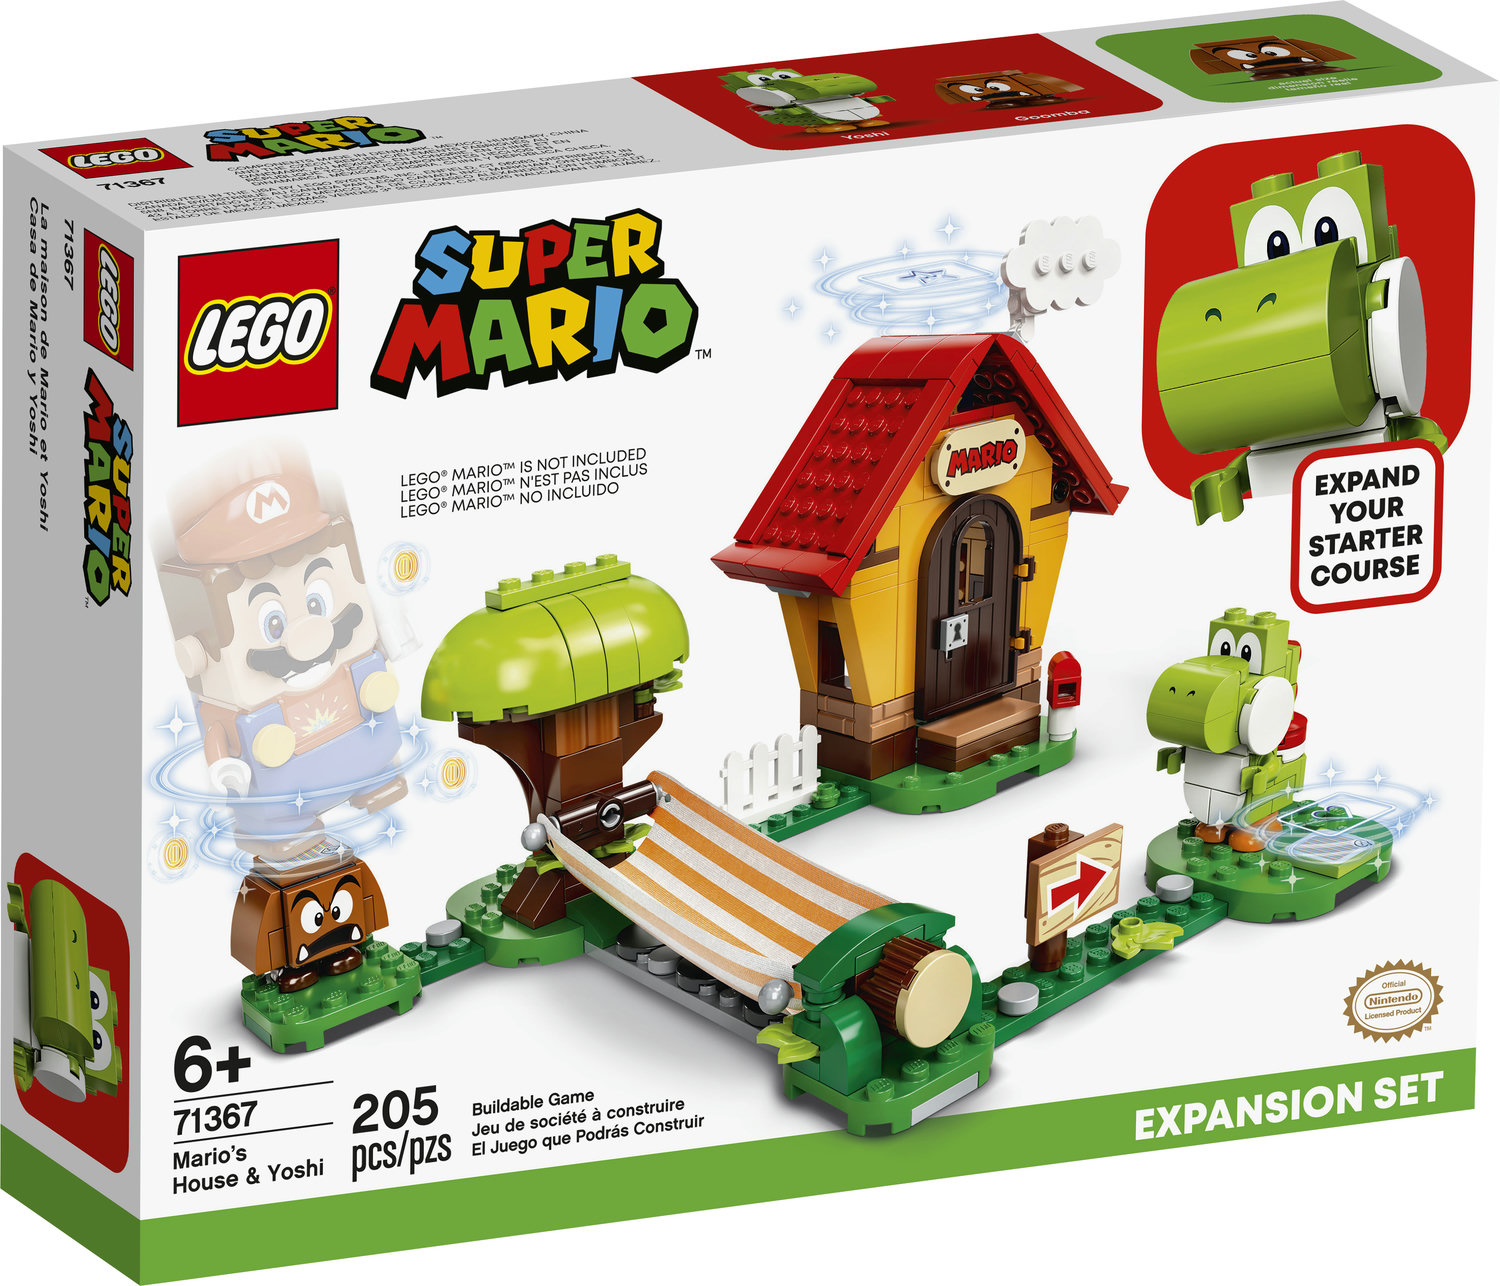 LEGO Super Mario Mario’s House & Yoshi Expansion Set 71367 Building Toy for Kids (205 Pieces) - image 3 of 5